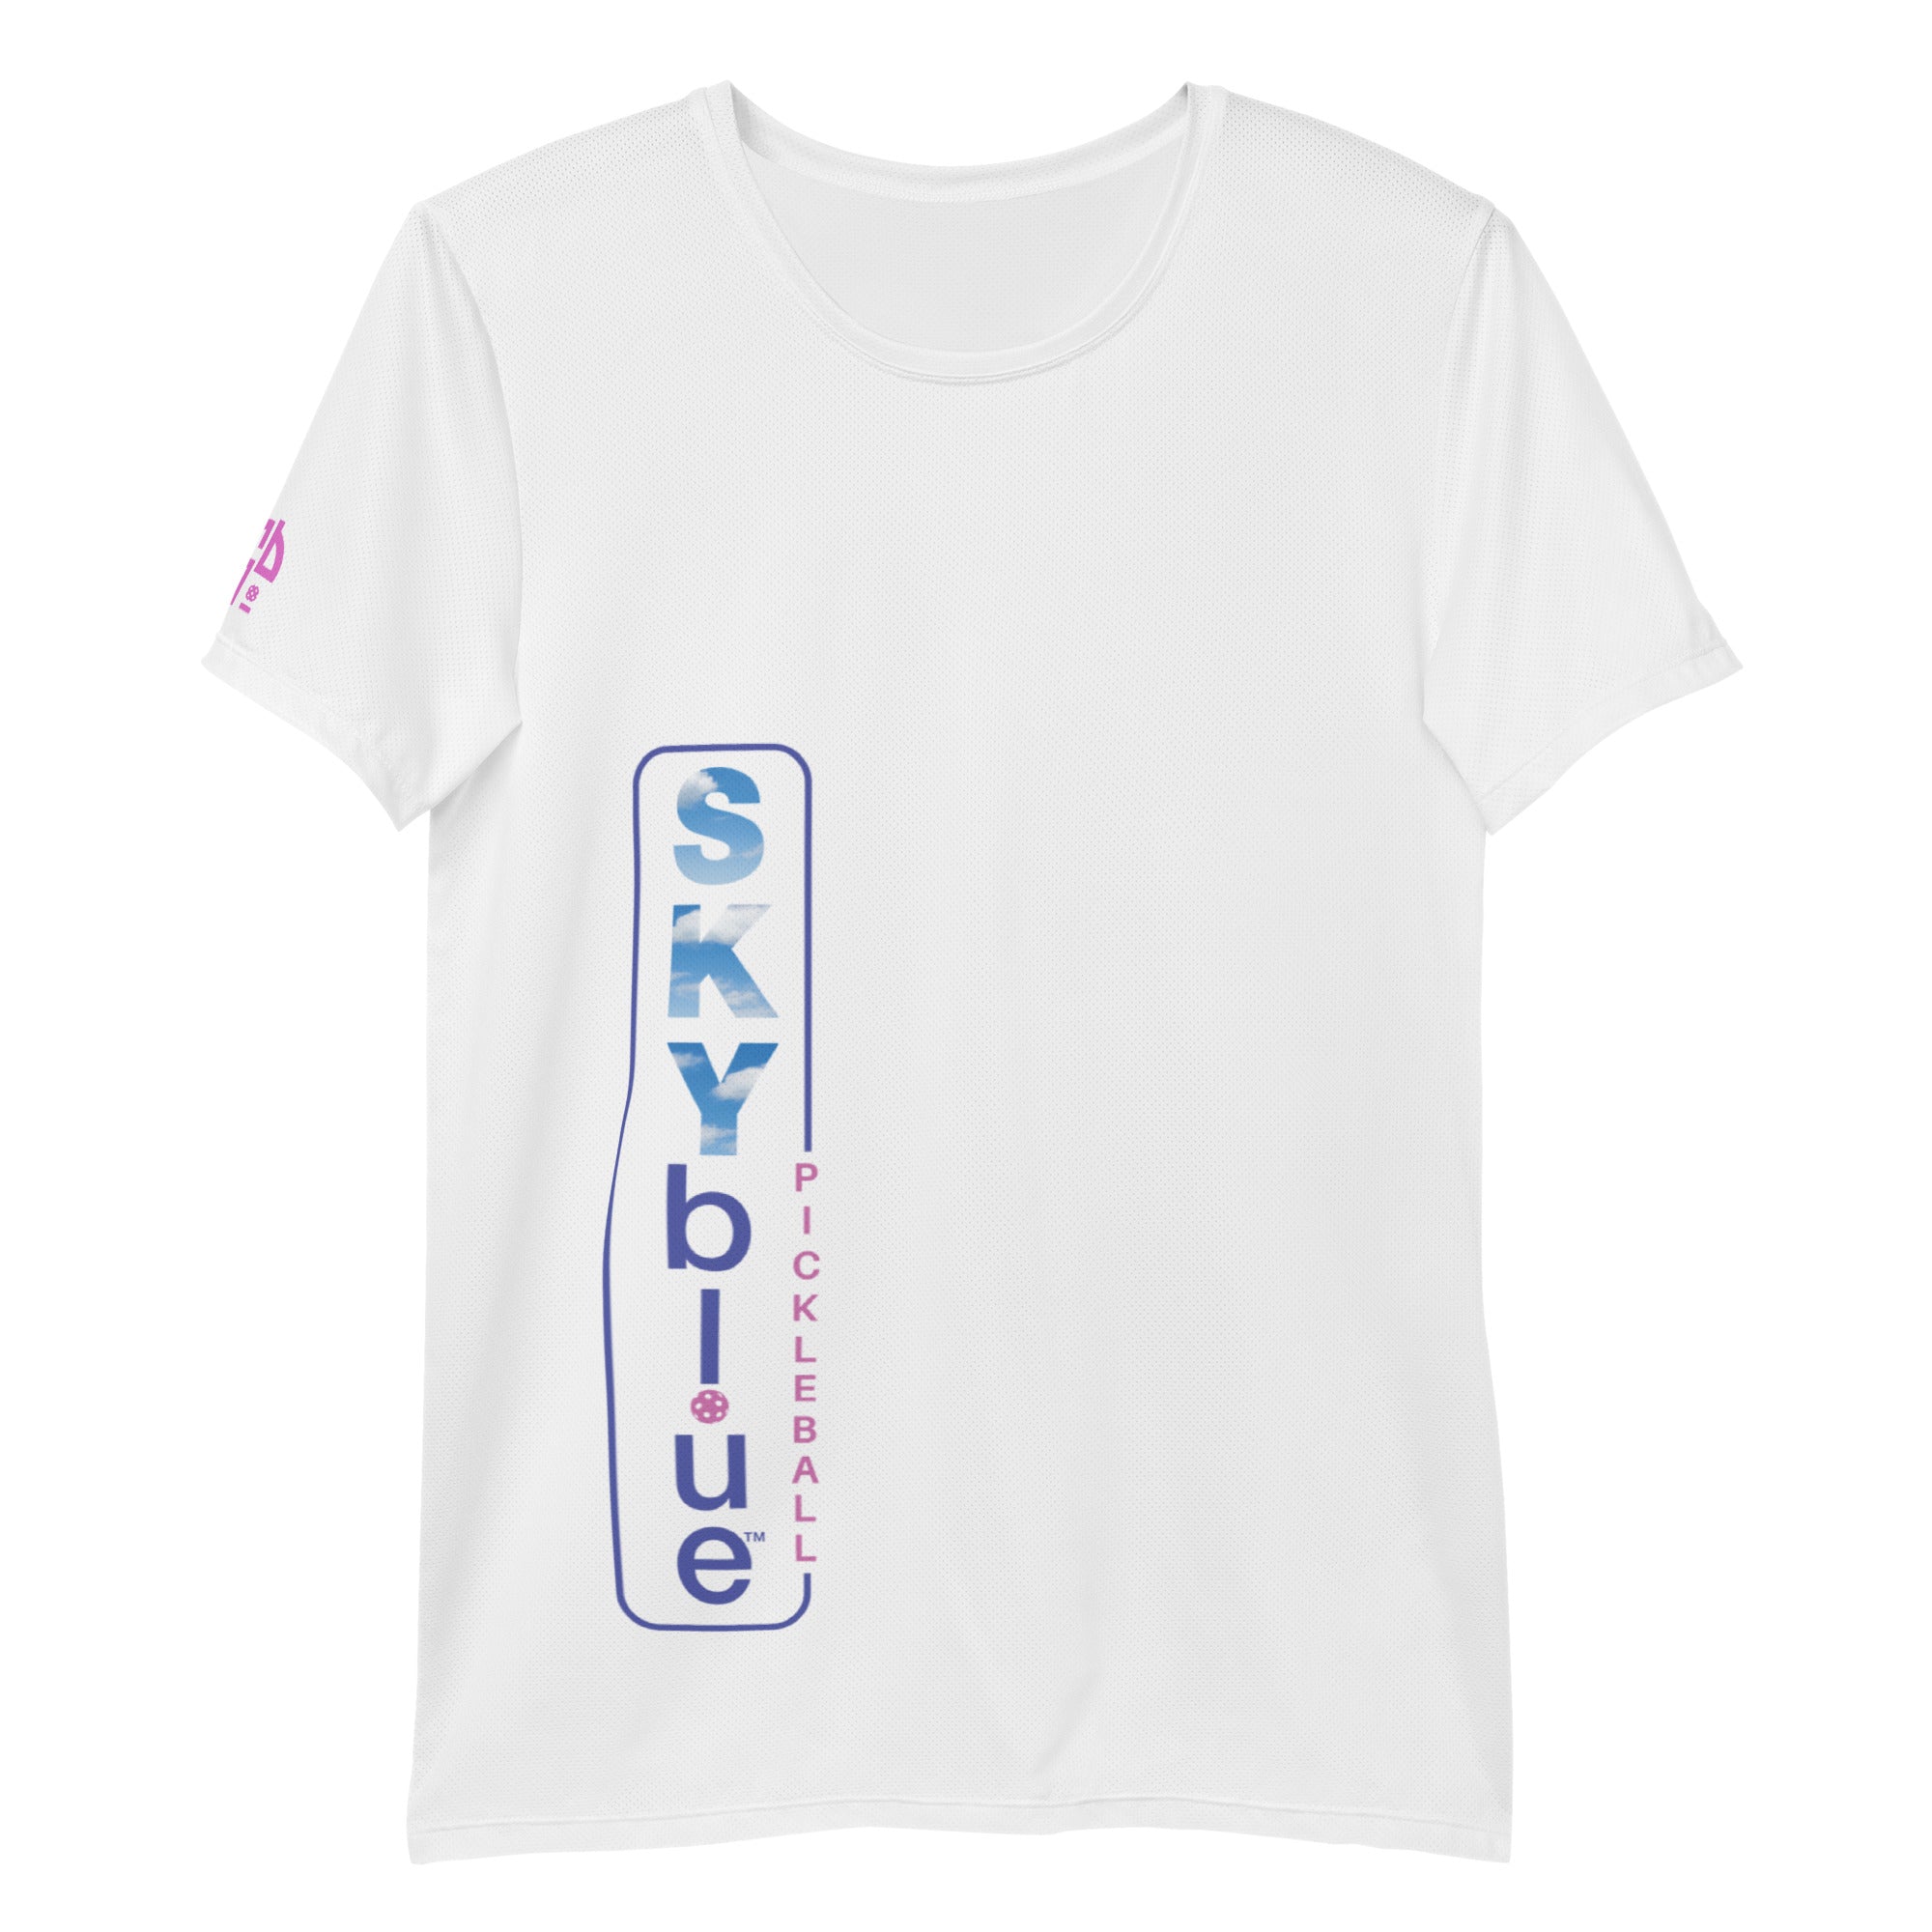 SKYblue™ Pickleball White Performance Fabric Shirt for Men, Accent Pink and Blue!